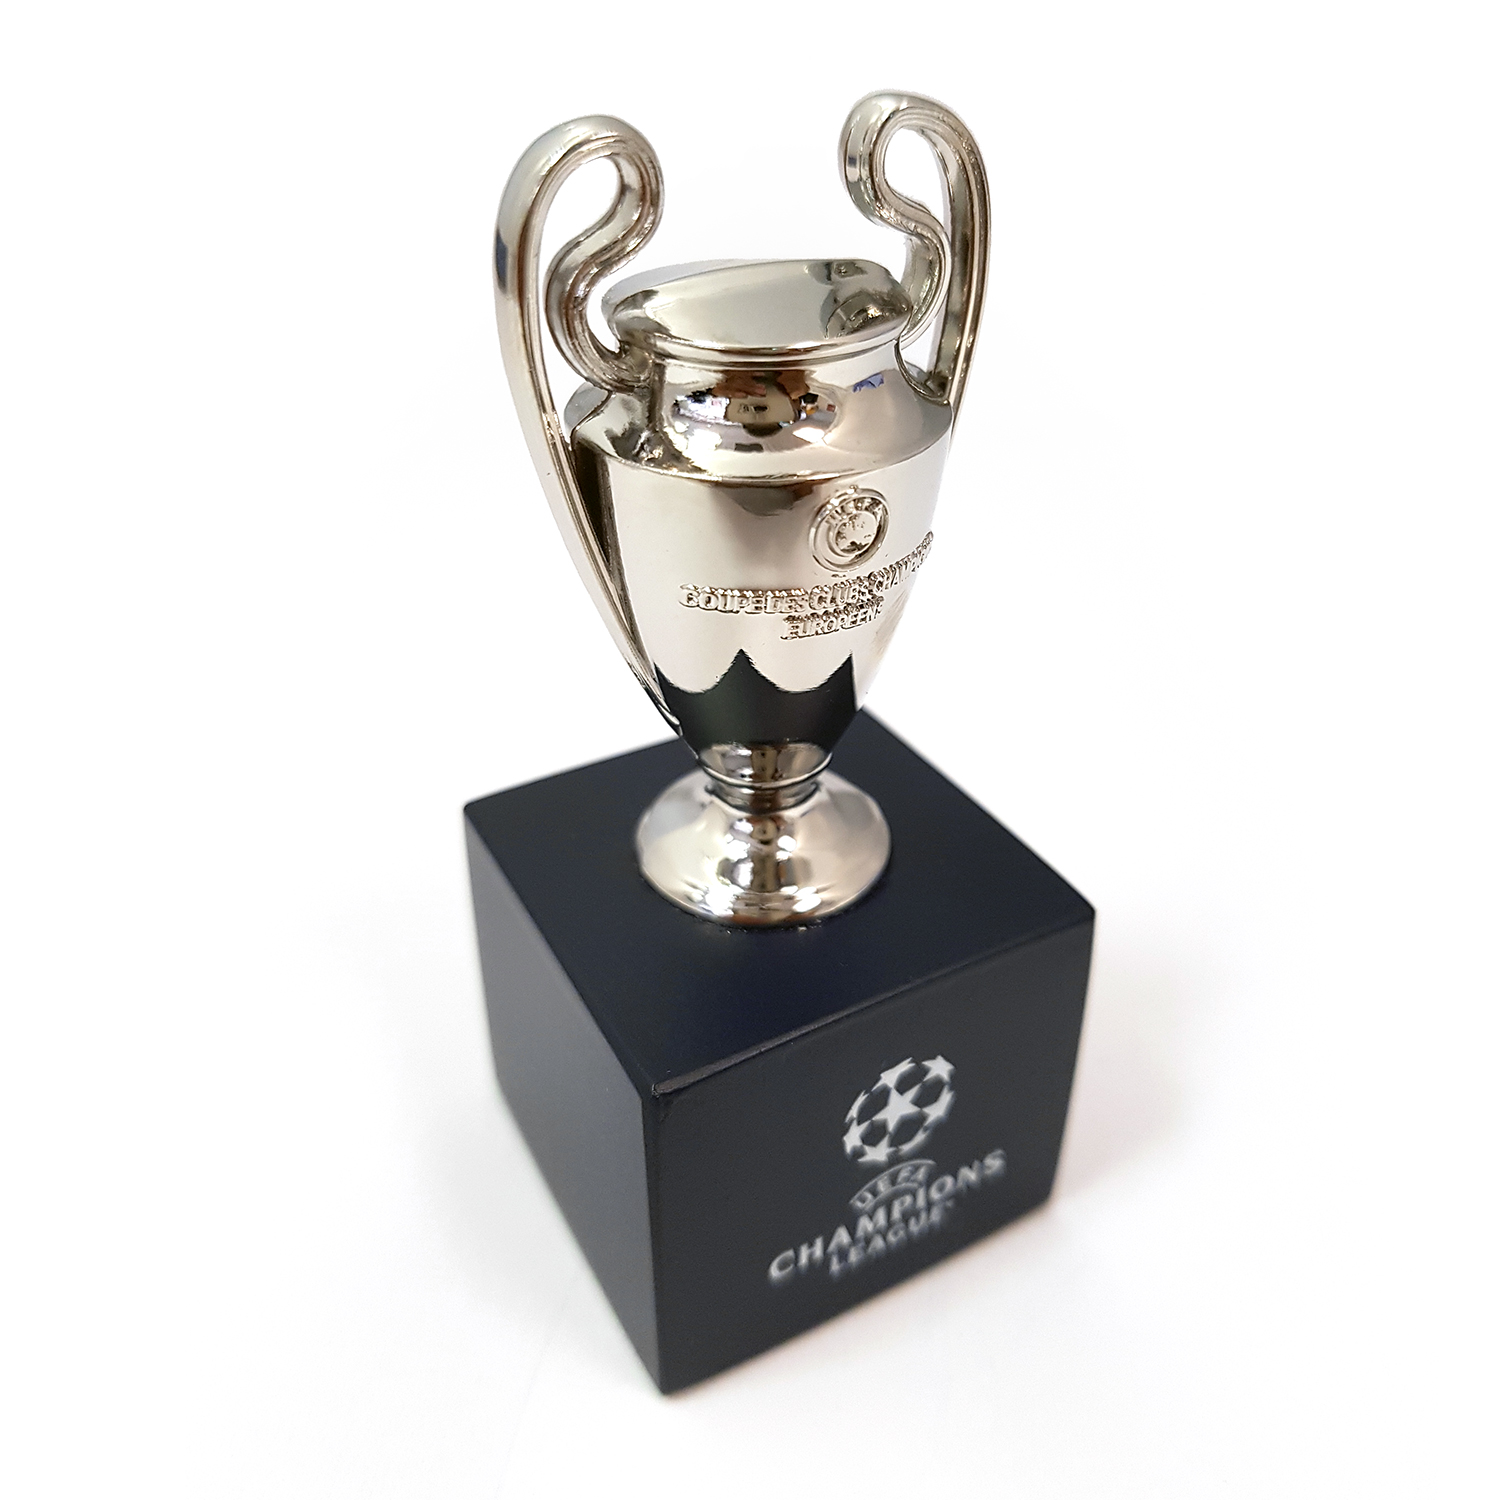 UEFA Champions League 45mm 3D Replica Trophy with Stand UEFA Club Competitions Online Store